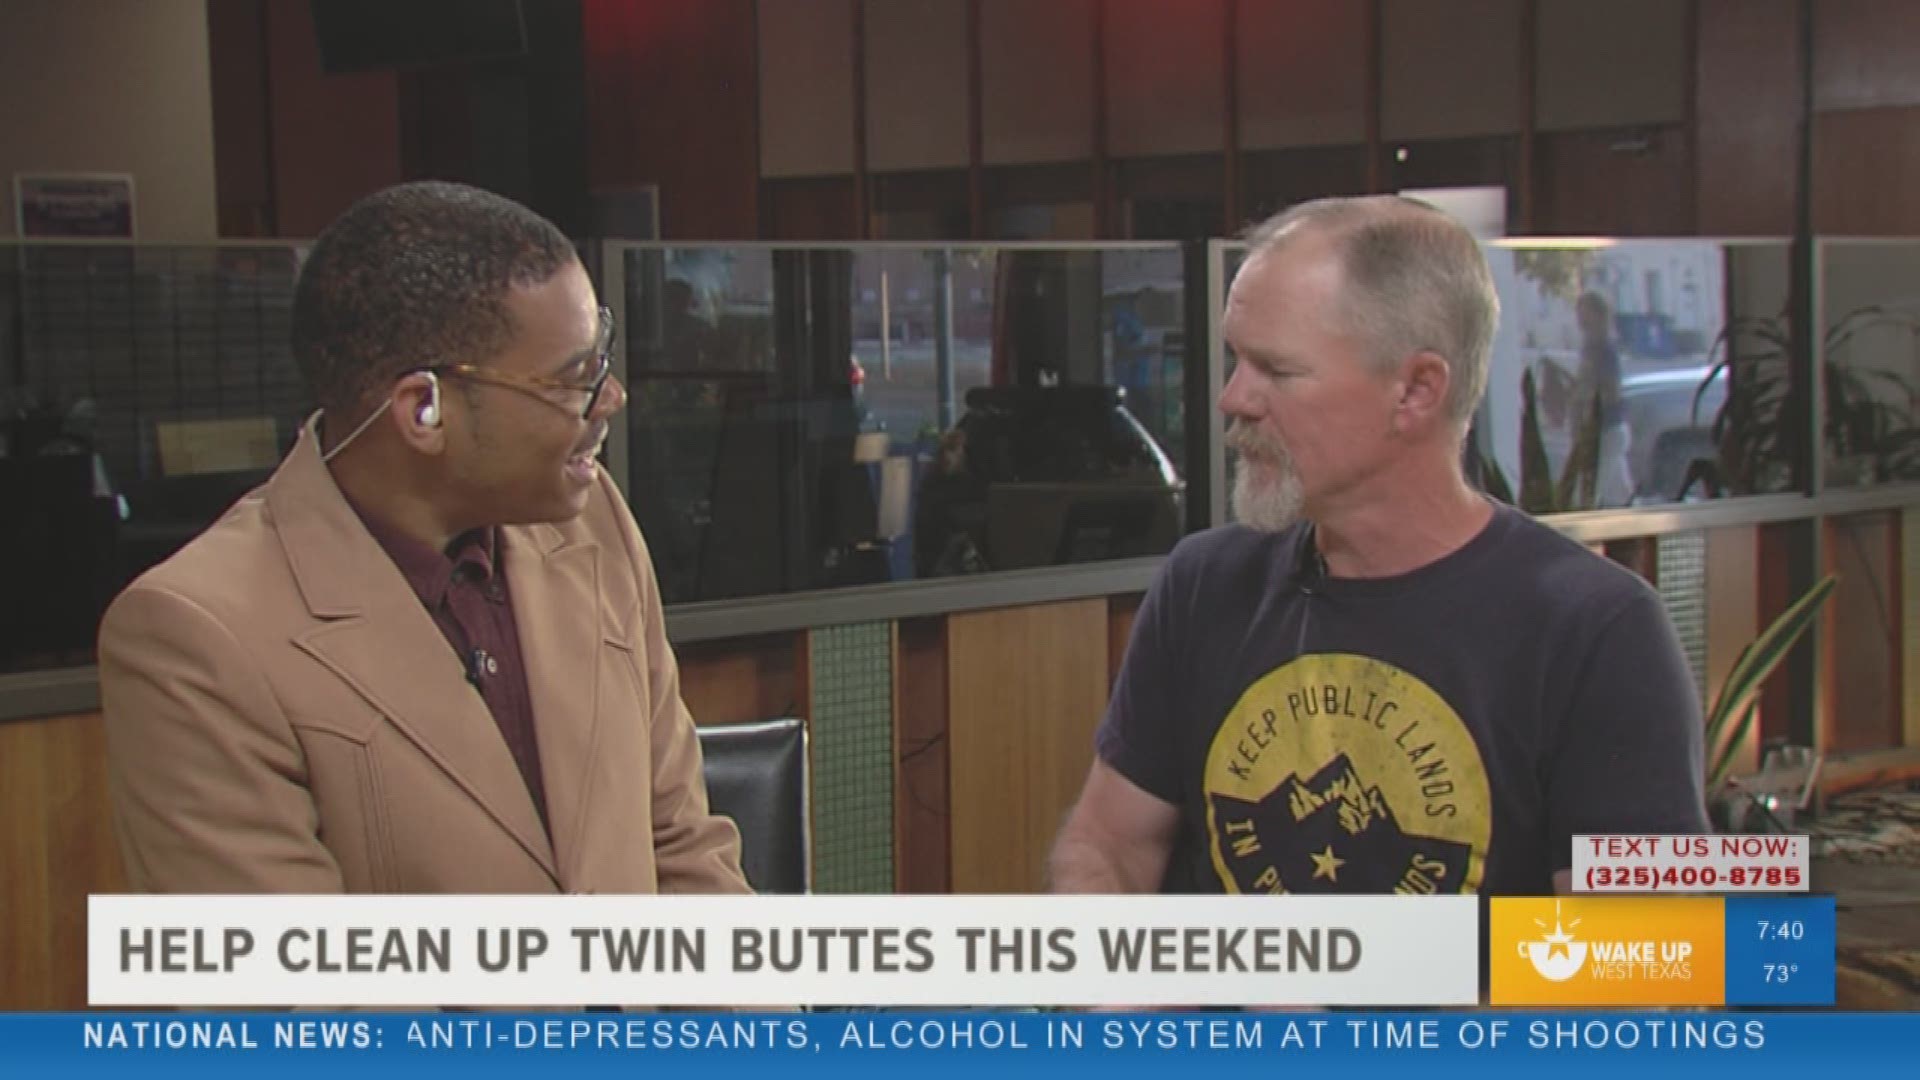 Our Malik Mingo spoke with a representative from the "Twin Buttes Clean Up" about what participants can expect August 17 at 8:00 a.m. at Twin Buttes Reservoir of of US-67.